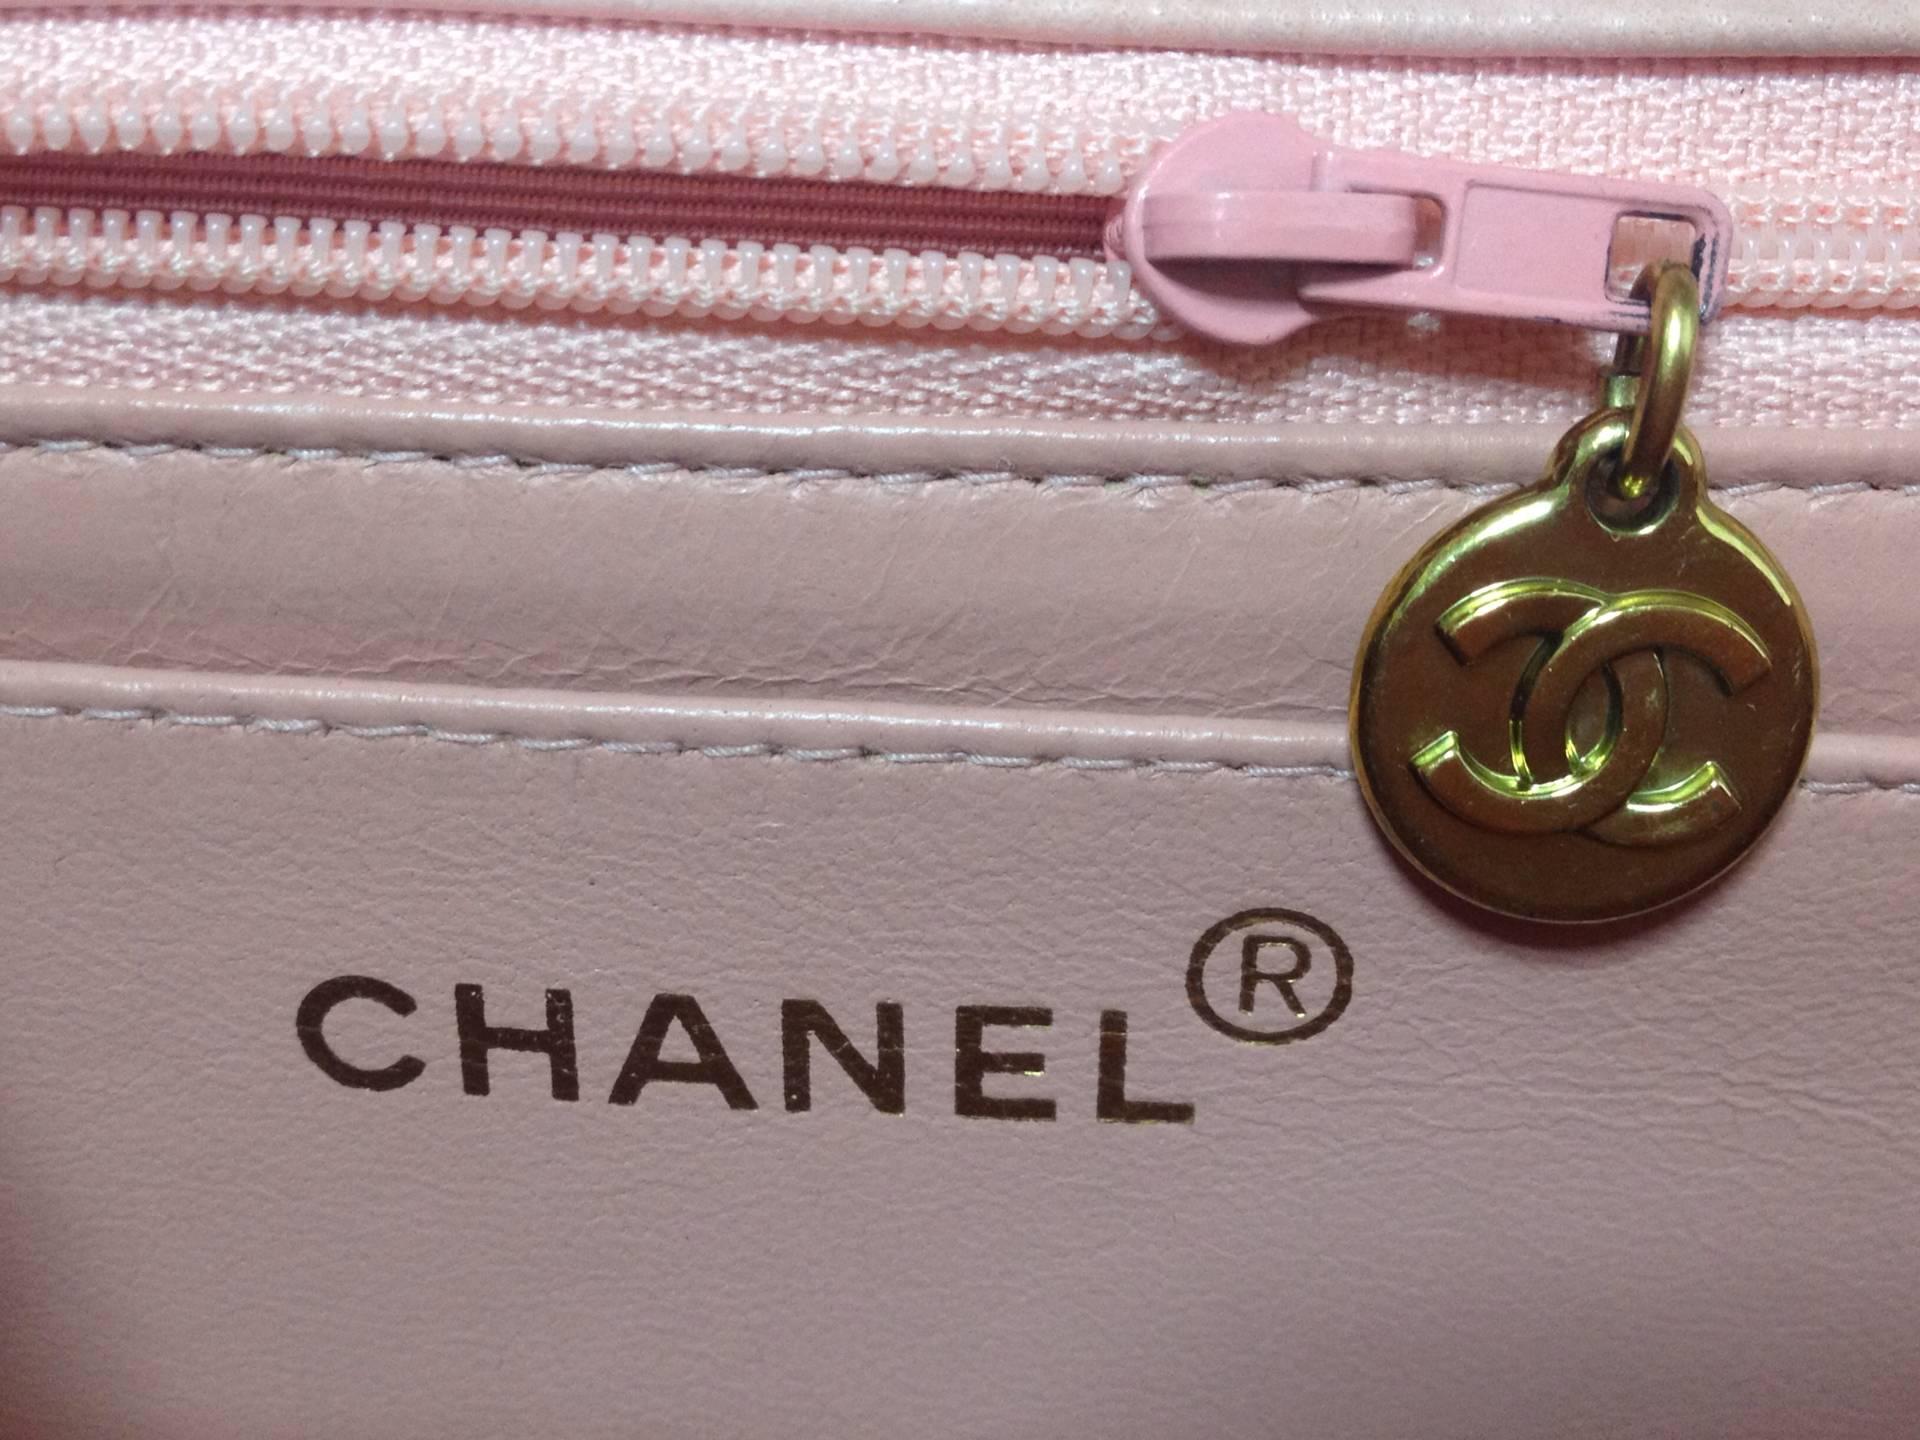 Vintage CHANEL milky pink color lambskin classic 2.55 handbag purse with gold CC For Sale 2